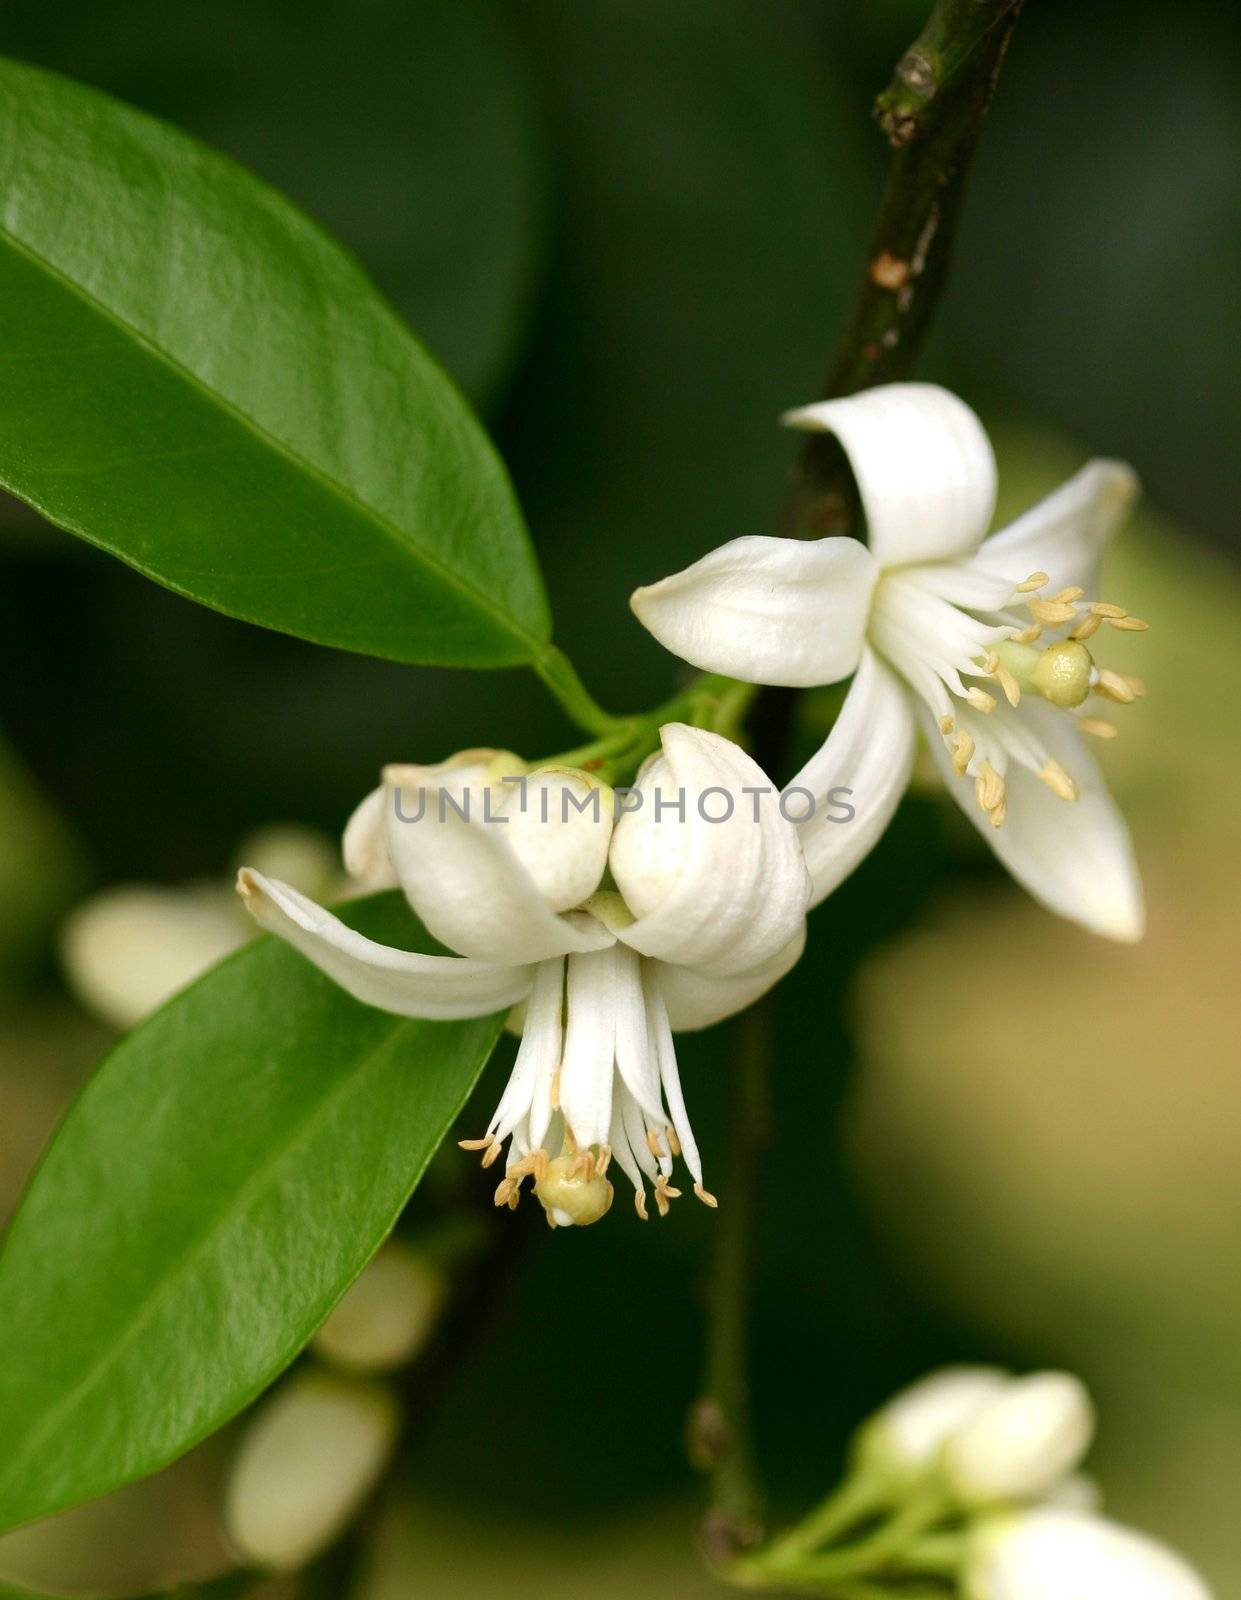 Orange blossom is the waxy, white blossom of the orange tree. Orange blossom are very fragrant. The Orange blossoms bloom in clusters of 1-6 during in spring and result in oranges the following autumn or winter. Last year's oranges often are still on the trees when the new Orange blossom are blooming.

